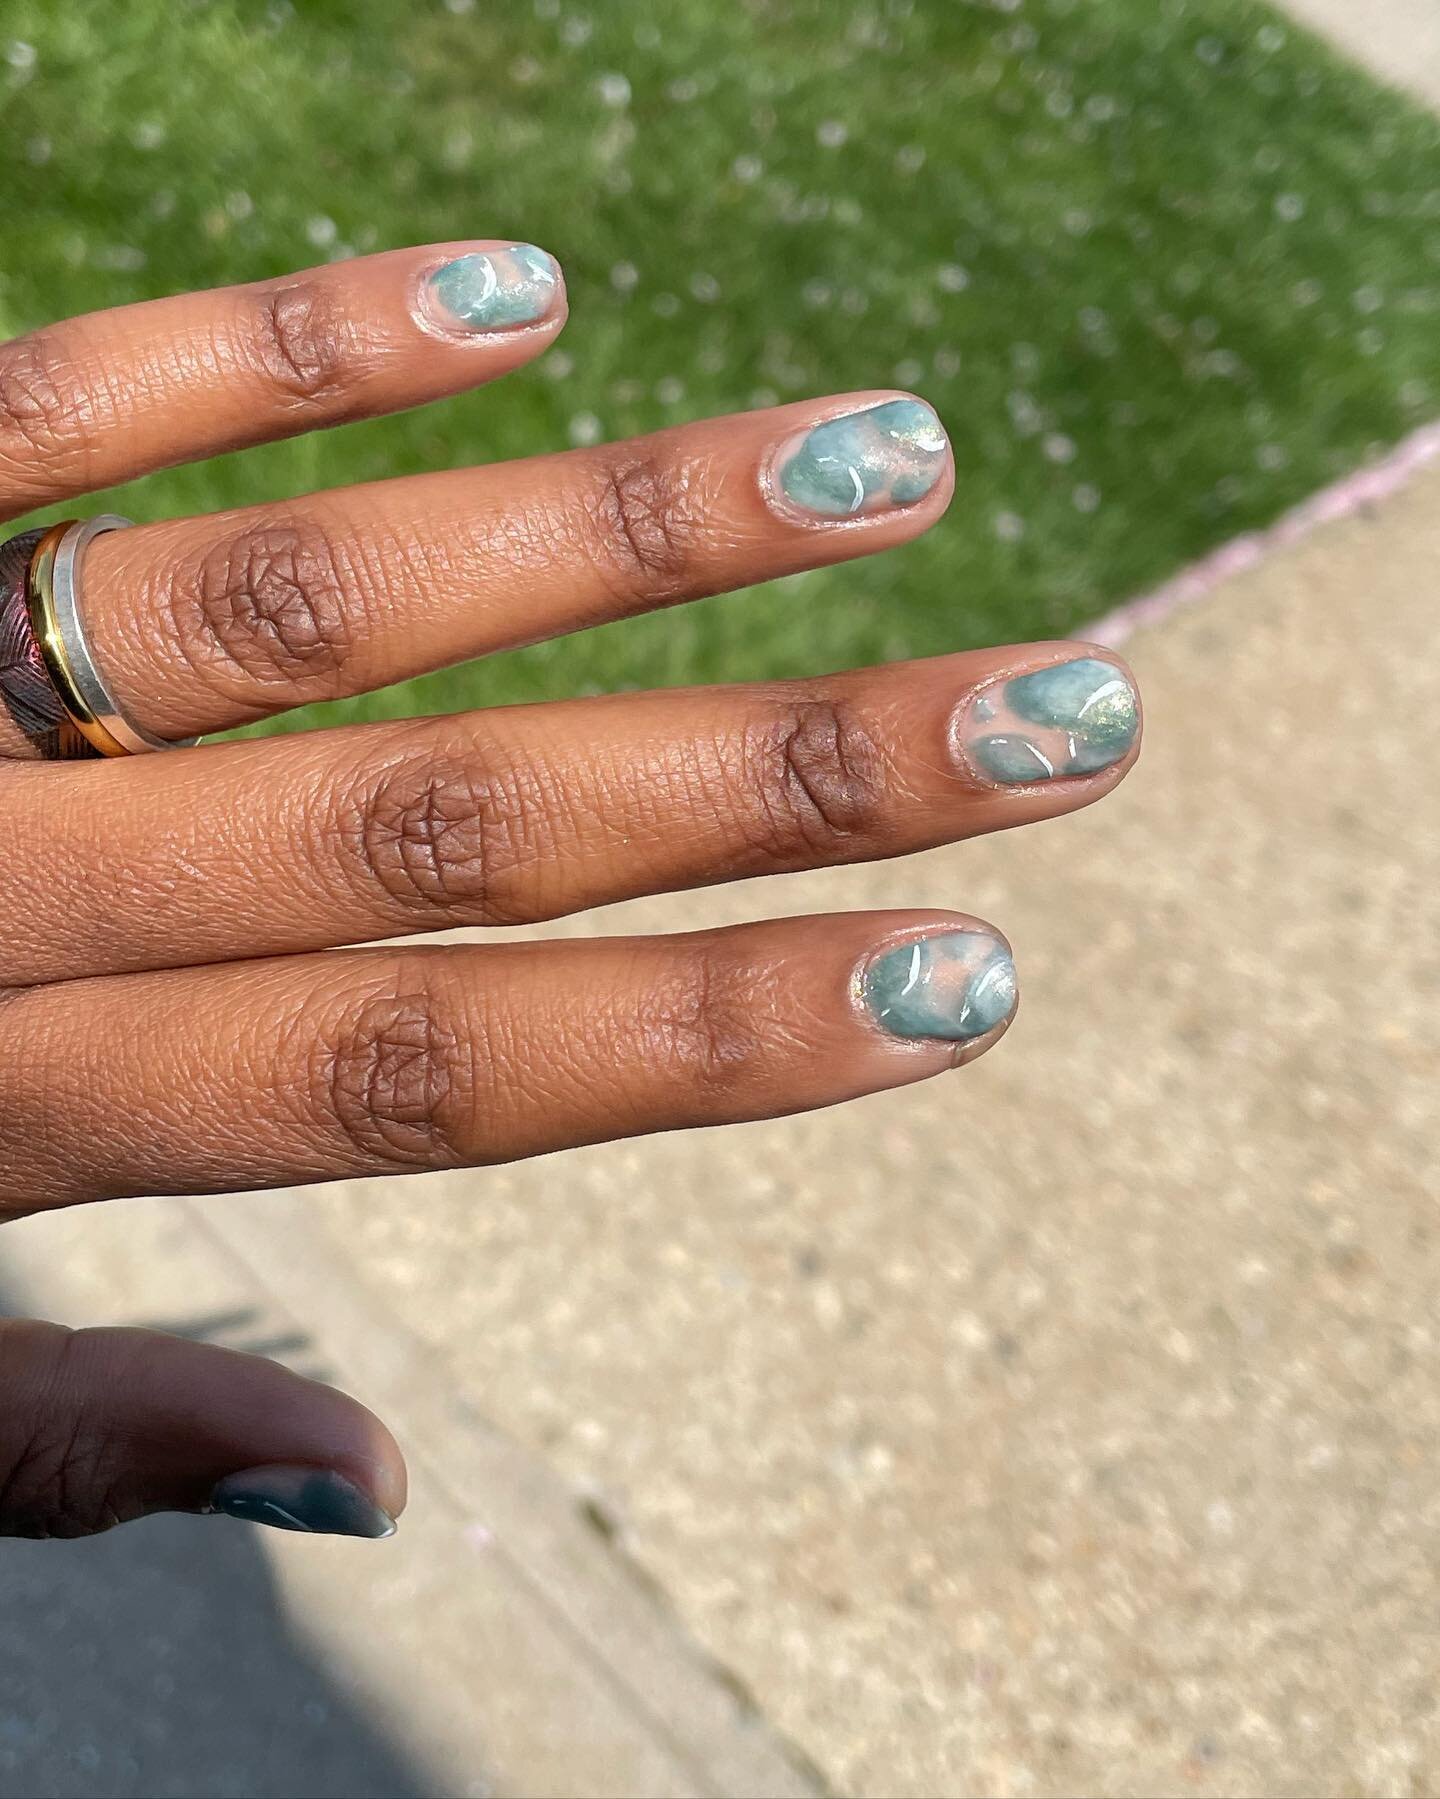 What a fun morning! I had to take a moment today to experiment with nail art, and it was such a great learning experience. 

I was inspired to try this idea from a fun waterdrop bubble manicure by @maco_mani 🫧 I tried the technique that involved pla